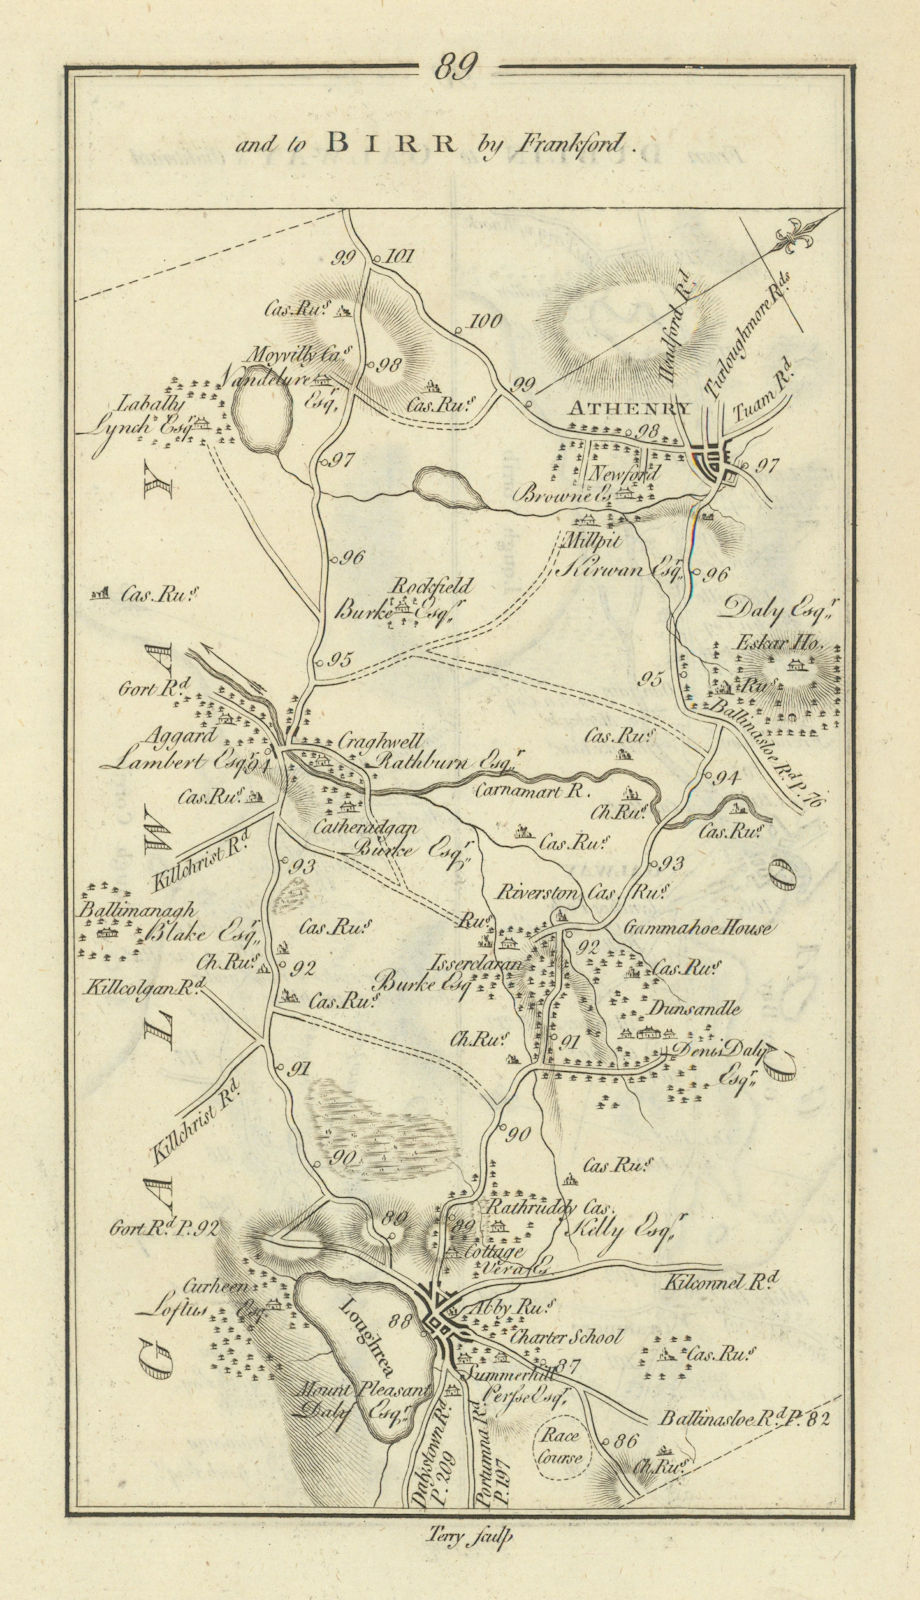 Associate Product #89 Dublin to Galway. Birr by Frankford Athenry Loughrea TAYLOR/SKINNER 1778 map